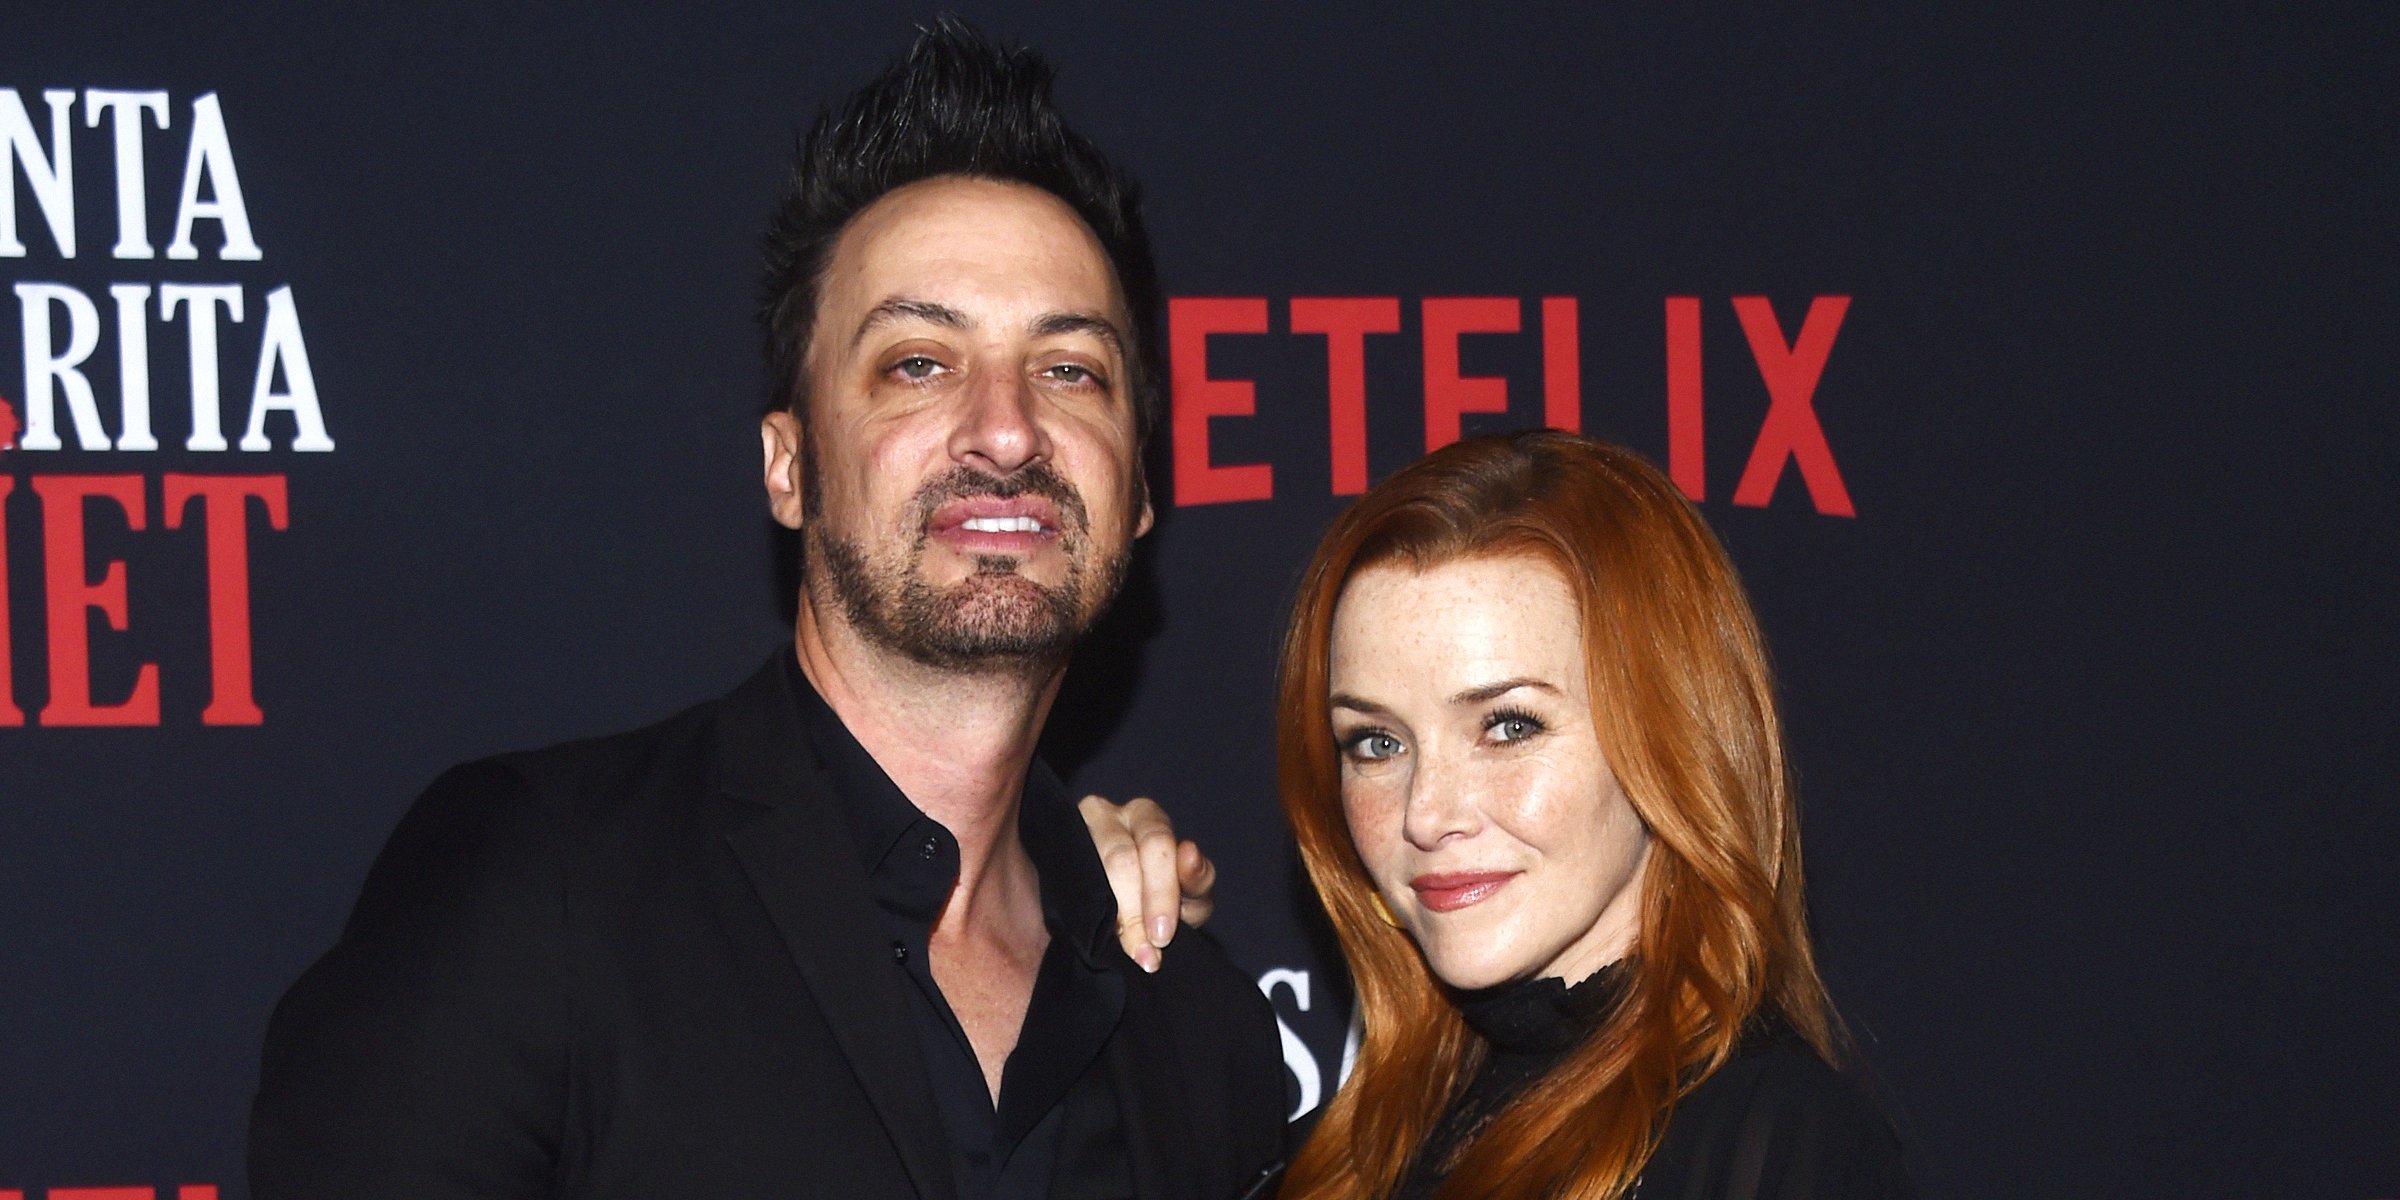 Stephen Full and Annie Wersching. | Source: Getty Images